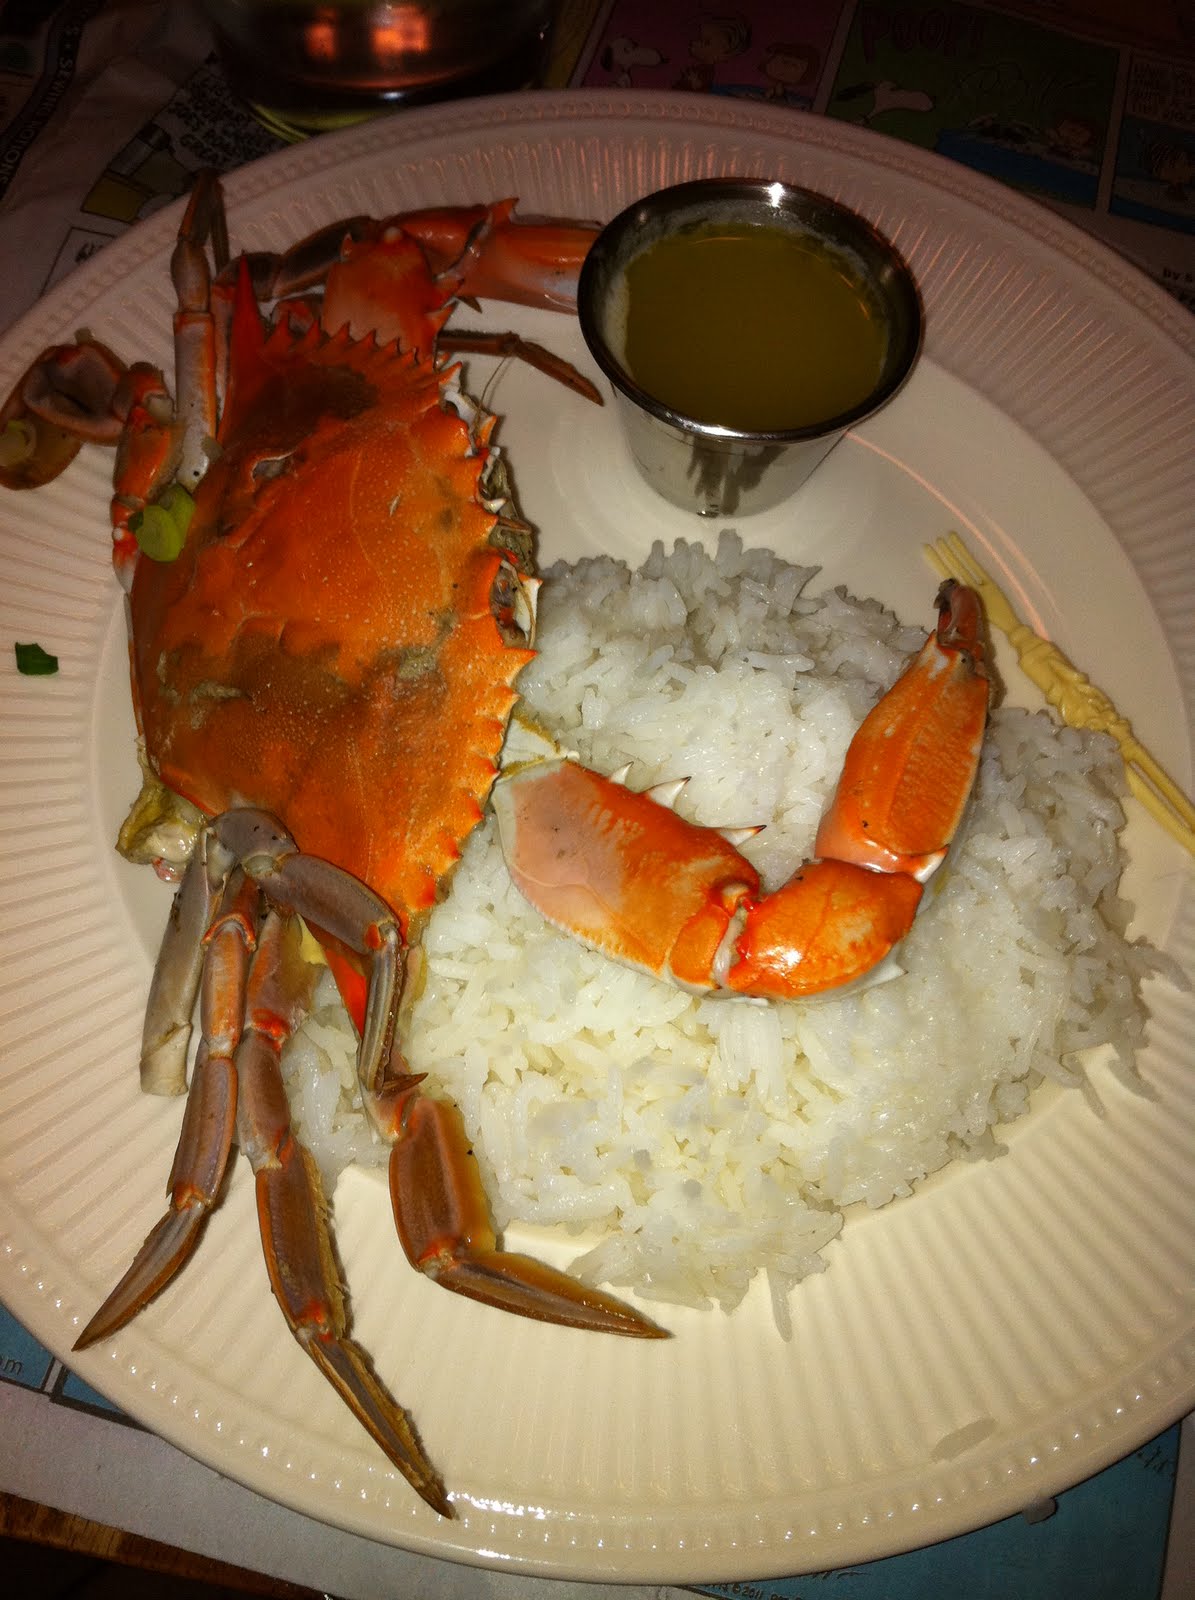 The Domestic Mommy Blog: Healthy Crab Dinner